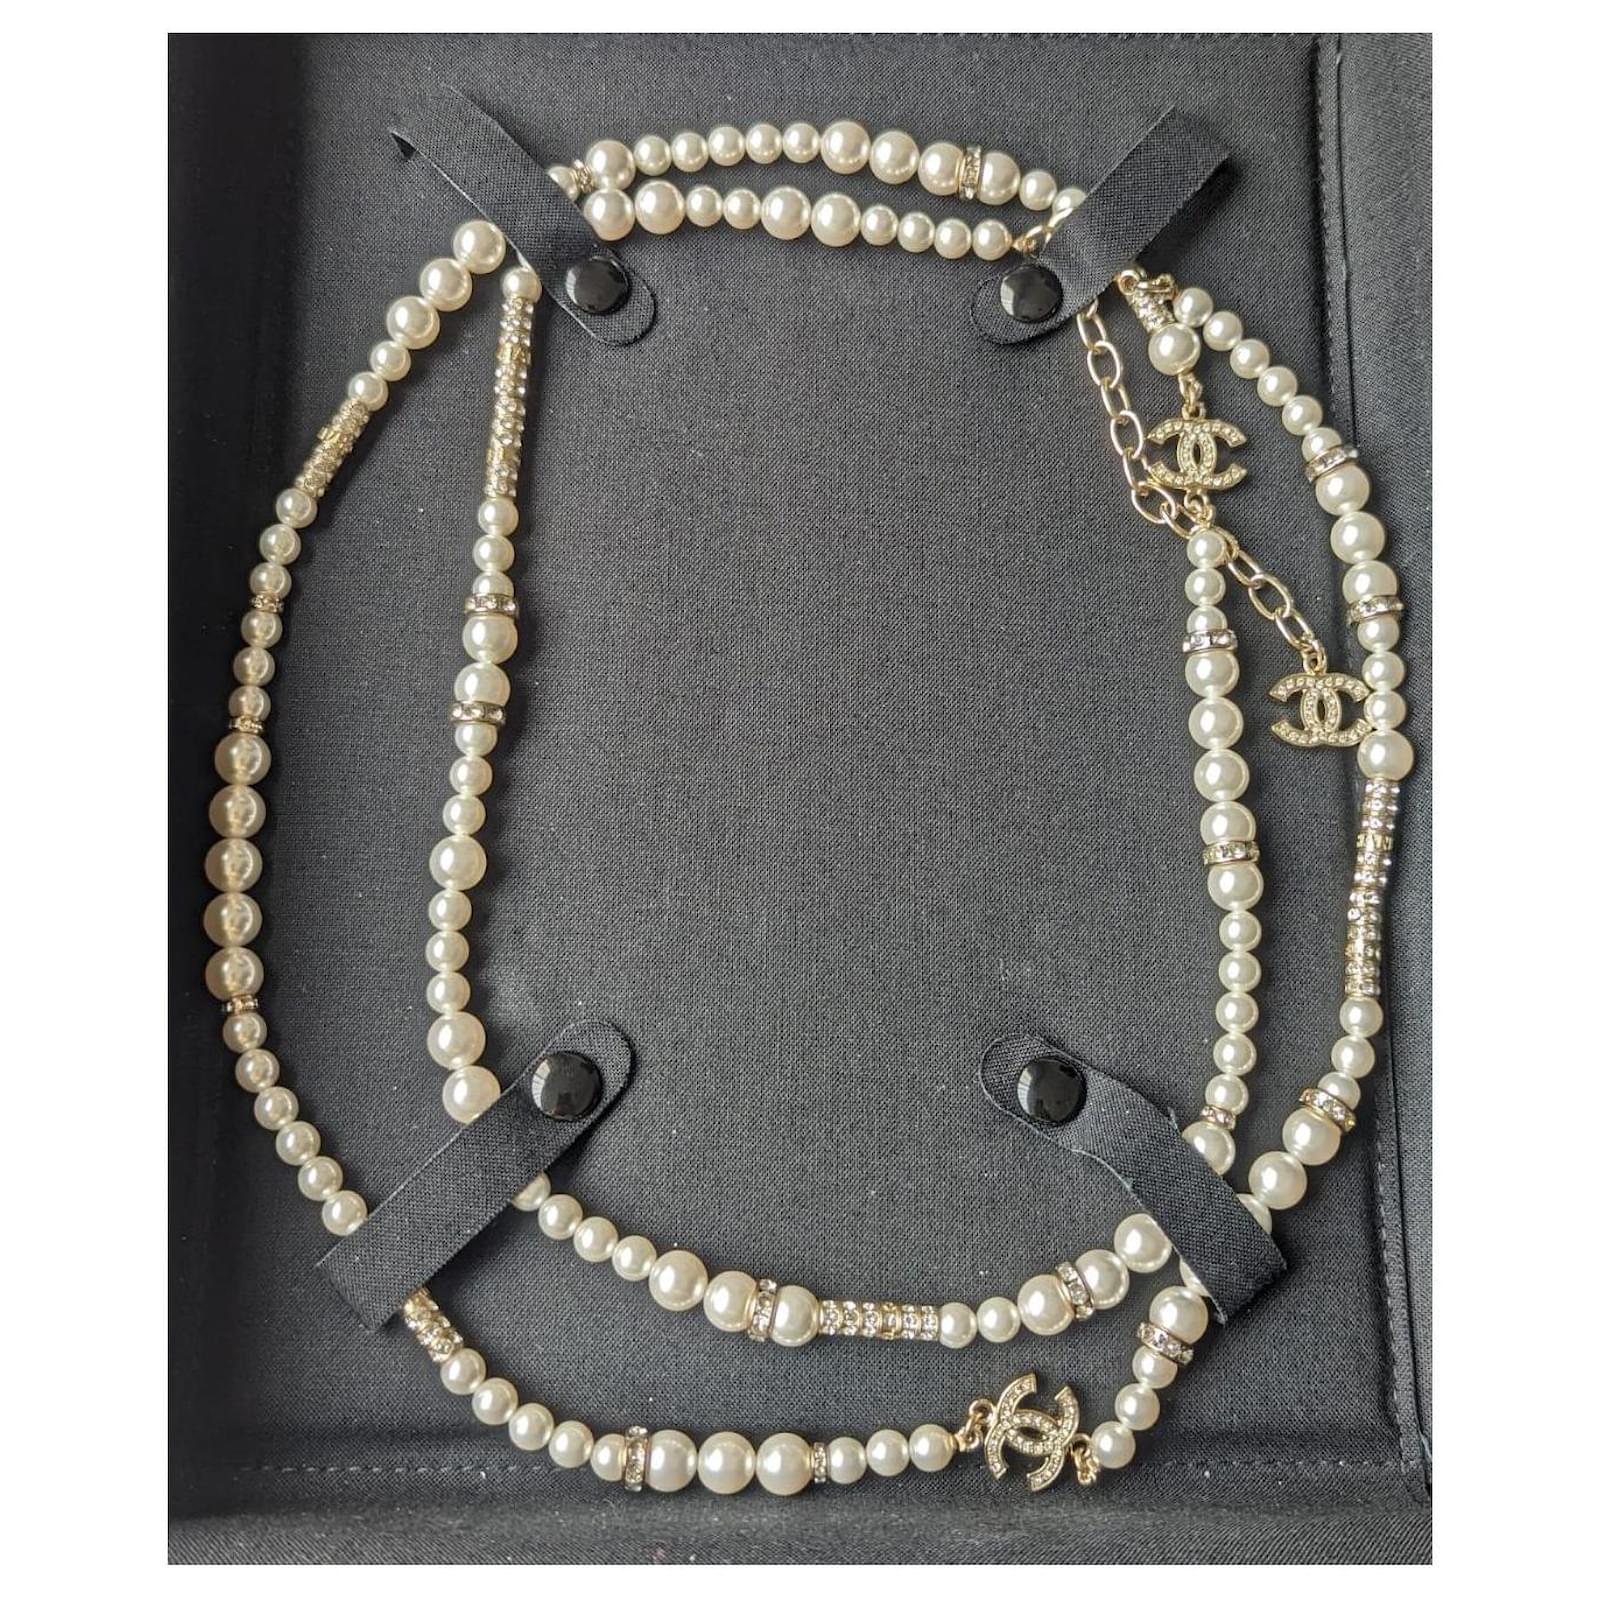 CHANEL TWISTED PEARL & CRYSTAL DOUBLE LOGO NECKLACE